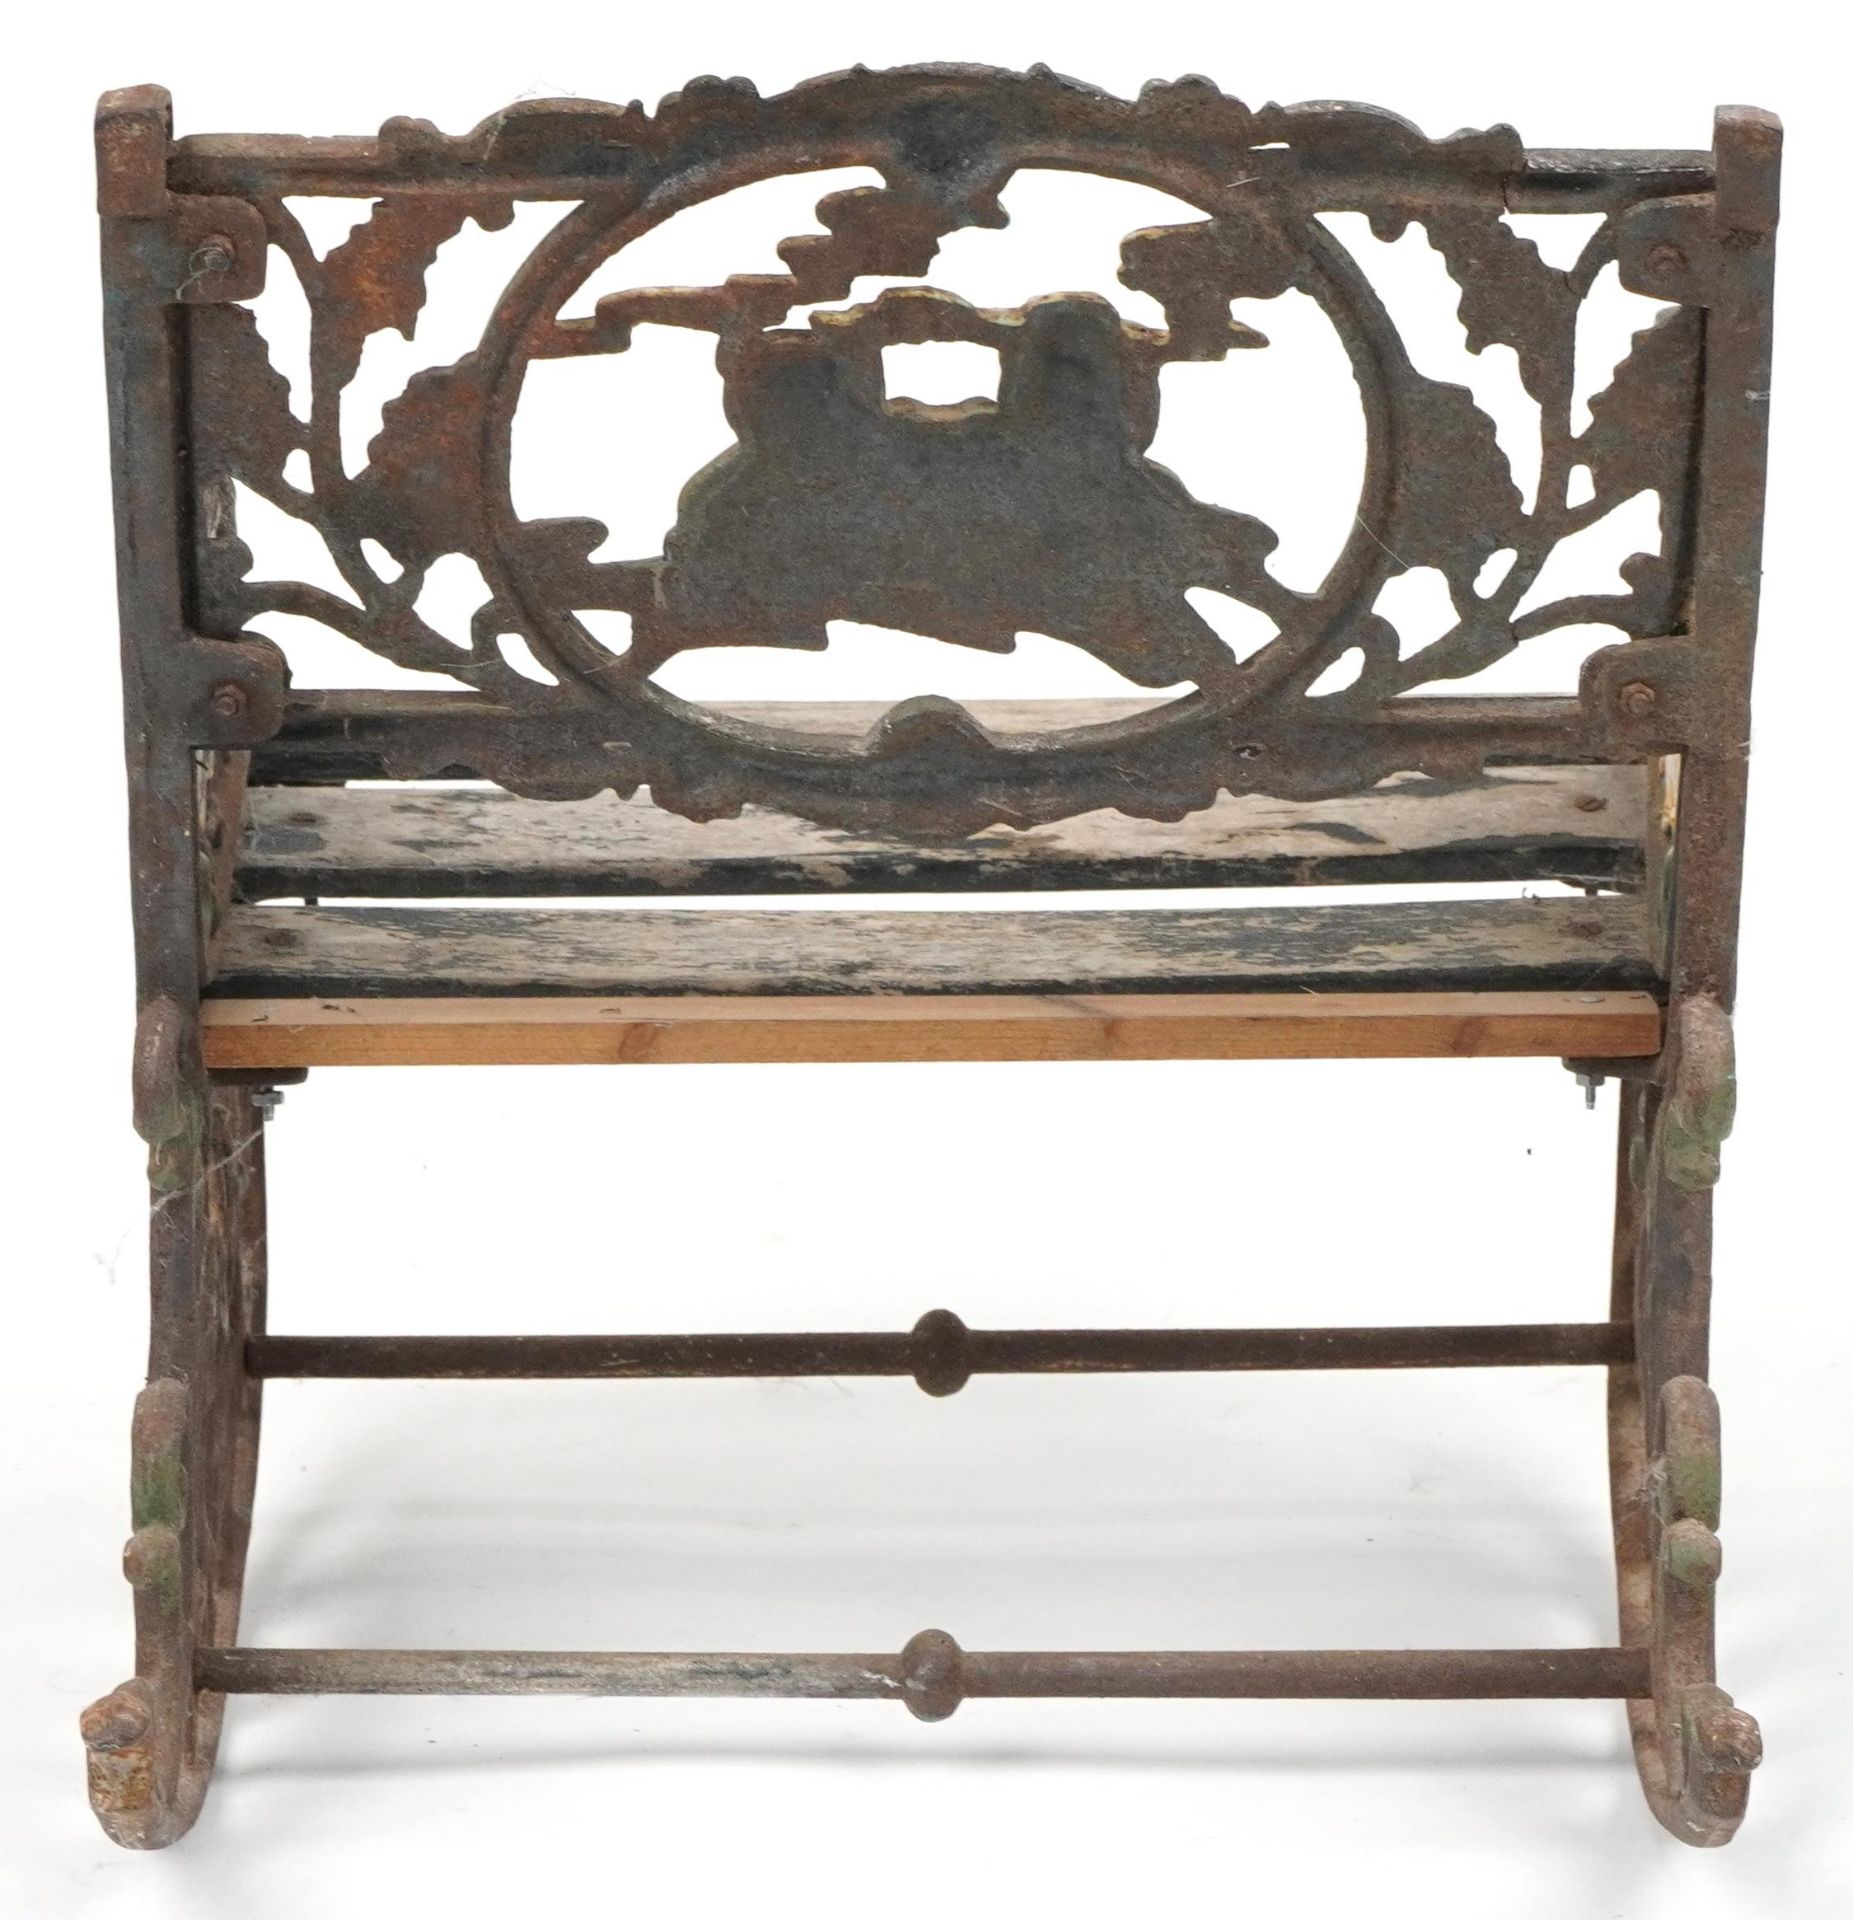 Child's painted cast iron rocking chair with wooden slats, cast with teddy bears and animals, 50cm - Image 4 of 4